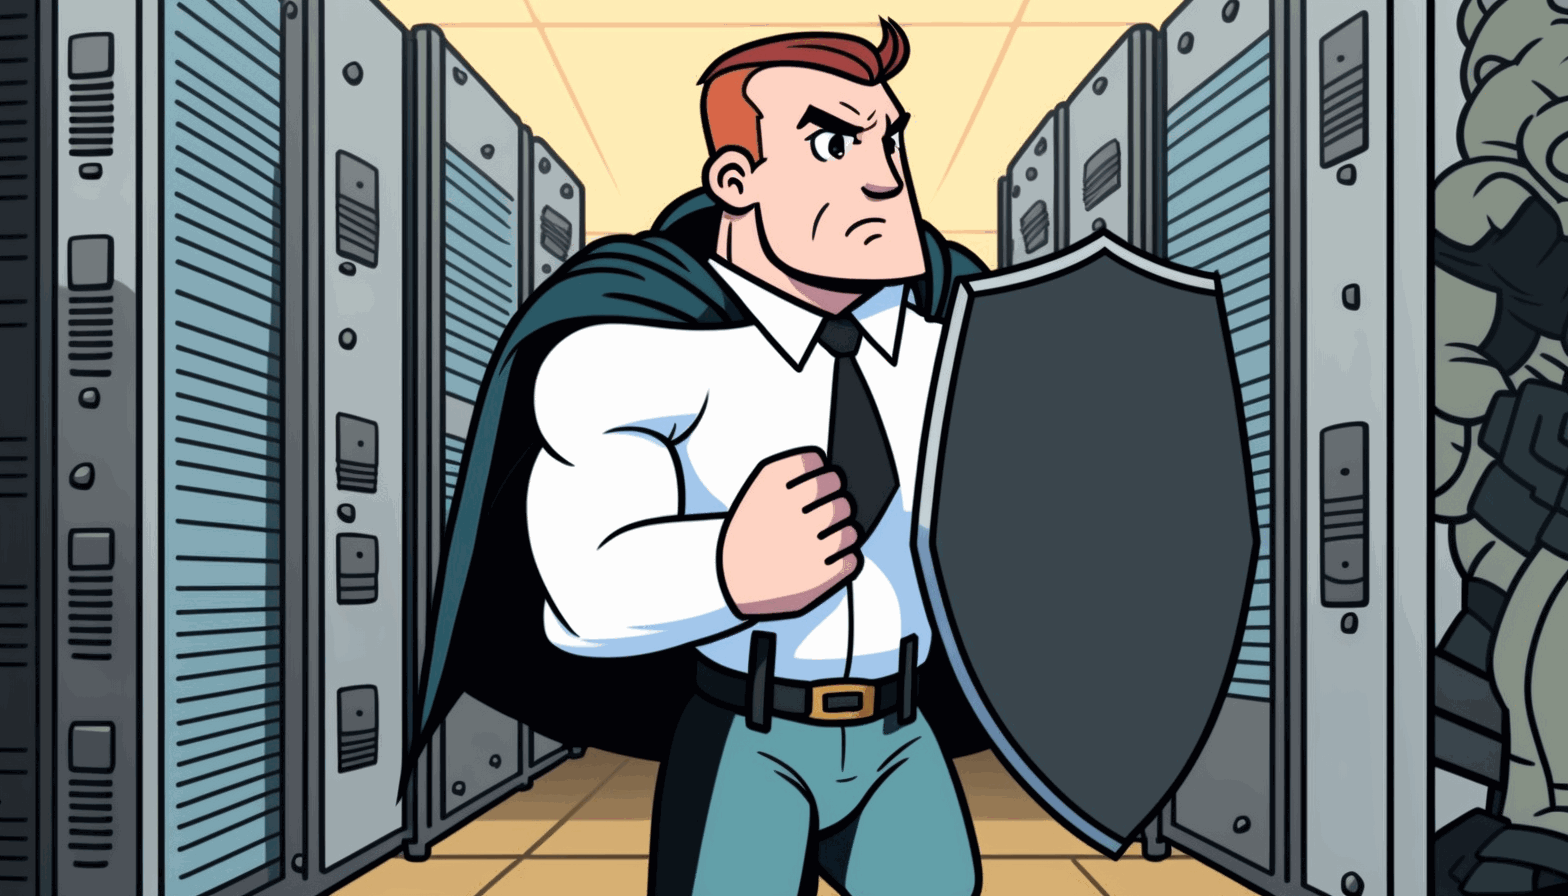 A cartoon image of a person holding a shield and standing guard in front of a server room to represent the protection and security that implementing patches provides.